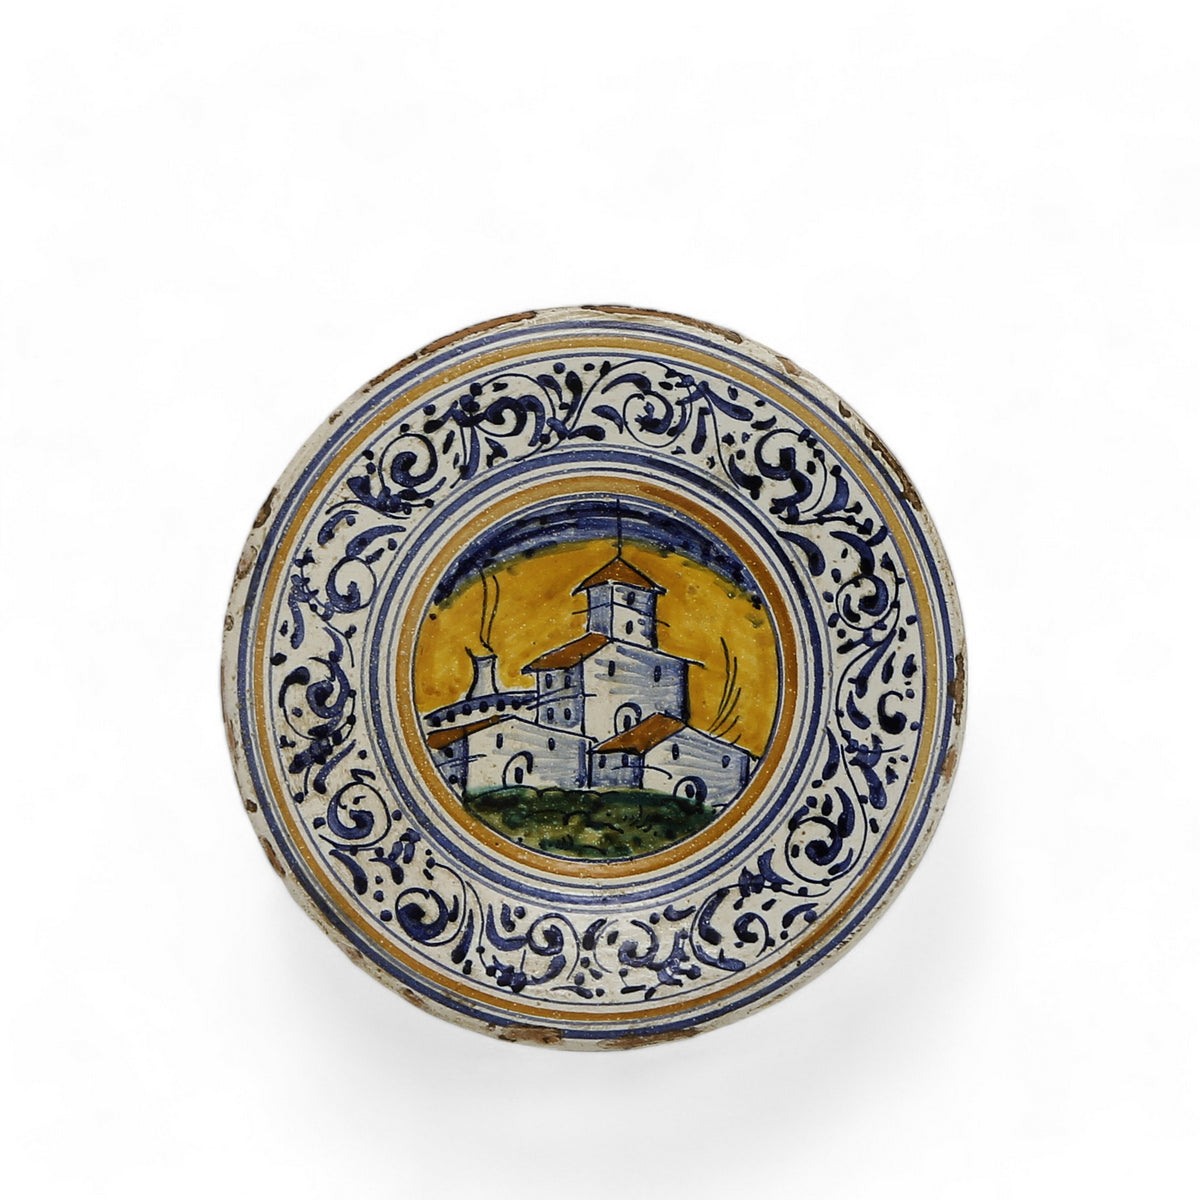 TUSCAN MAJOLICA: Plates featuring a traditional Tuscan designs - SET OF 3 PCS on a three-tier plate rack stand.